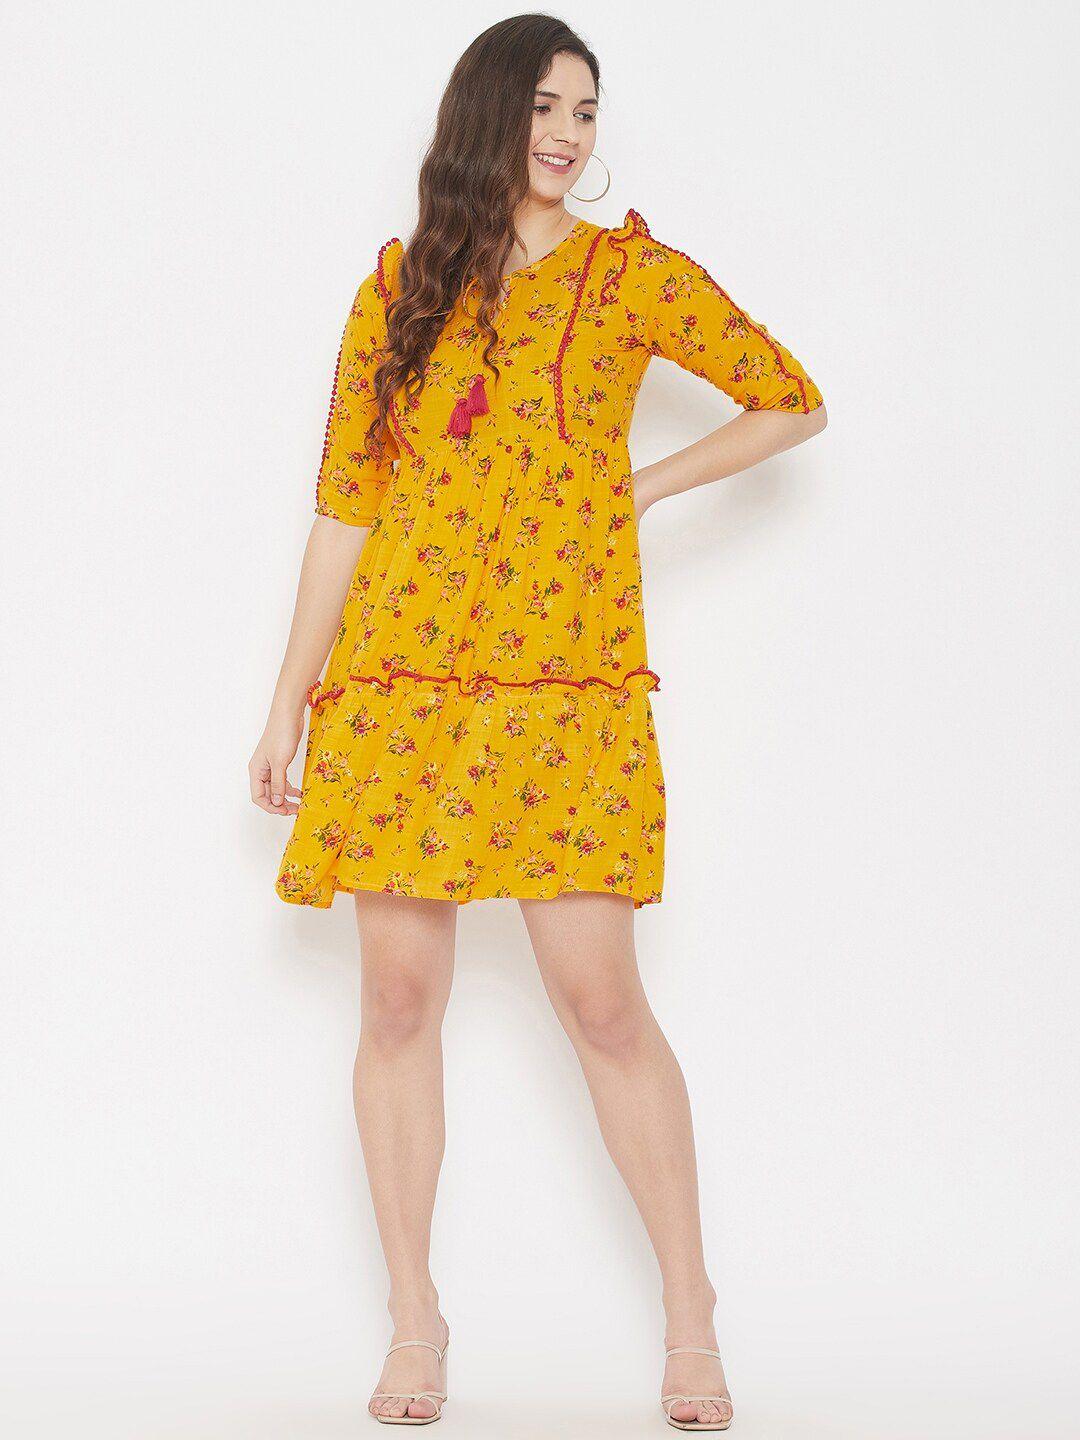 winered yellow floral printed dress